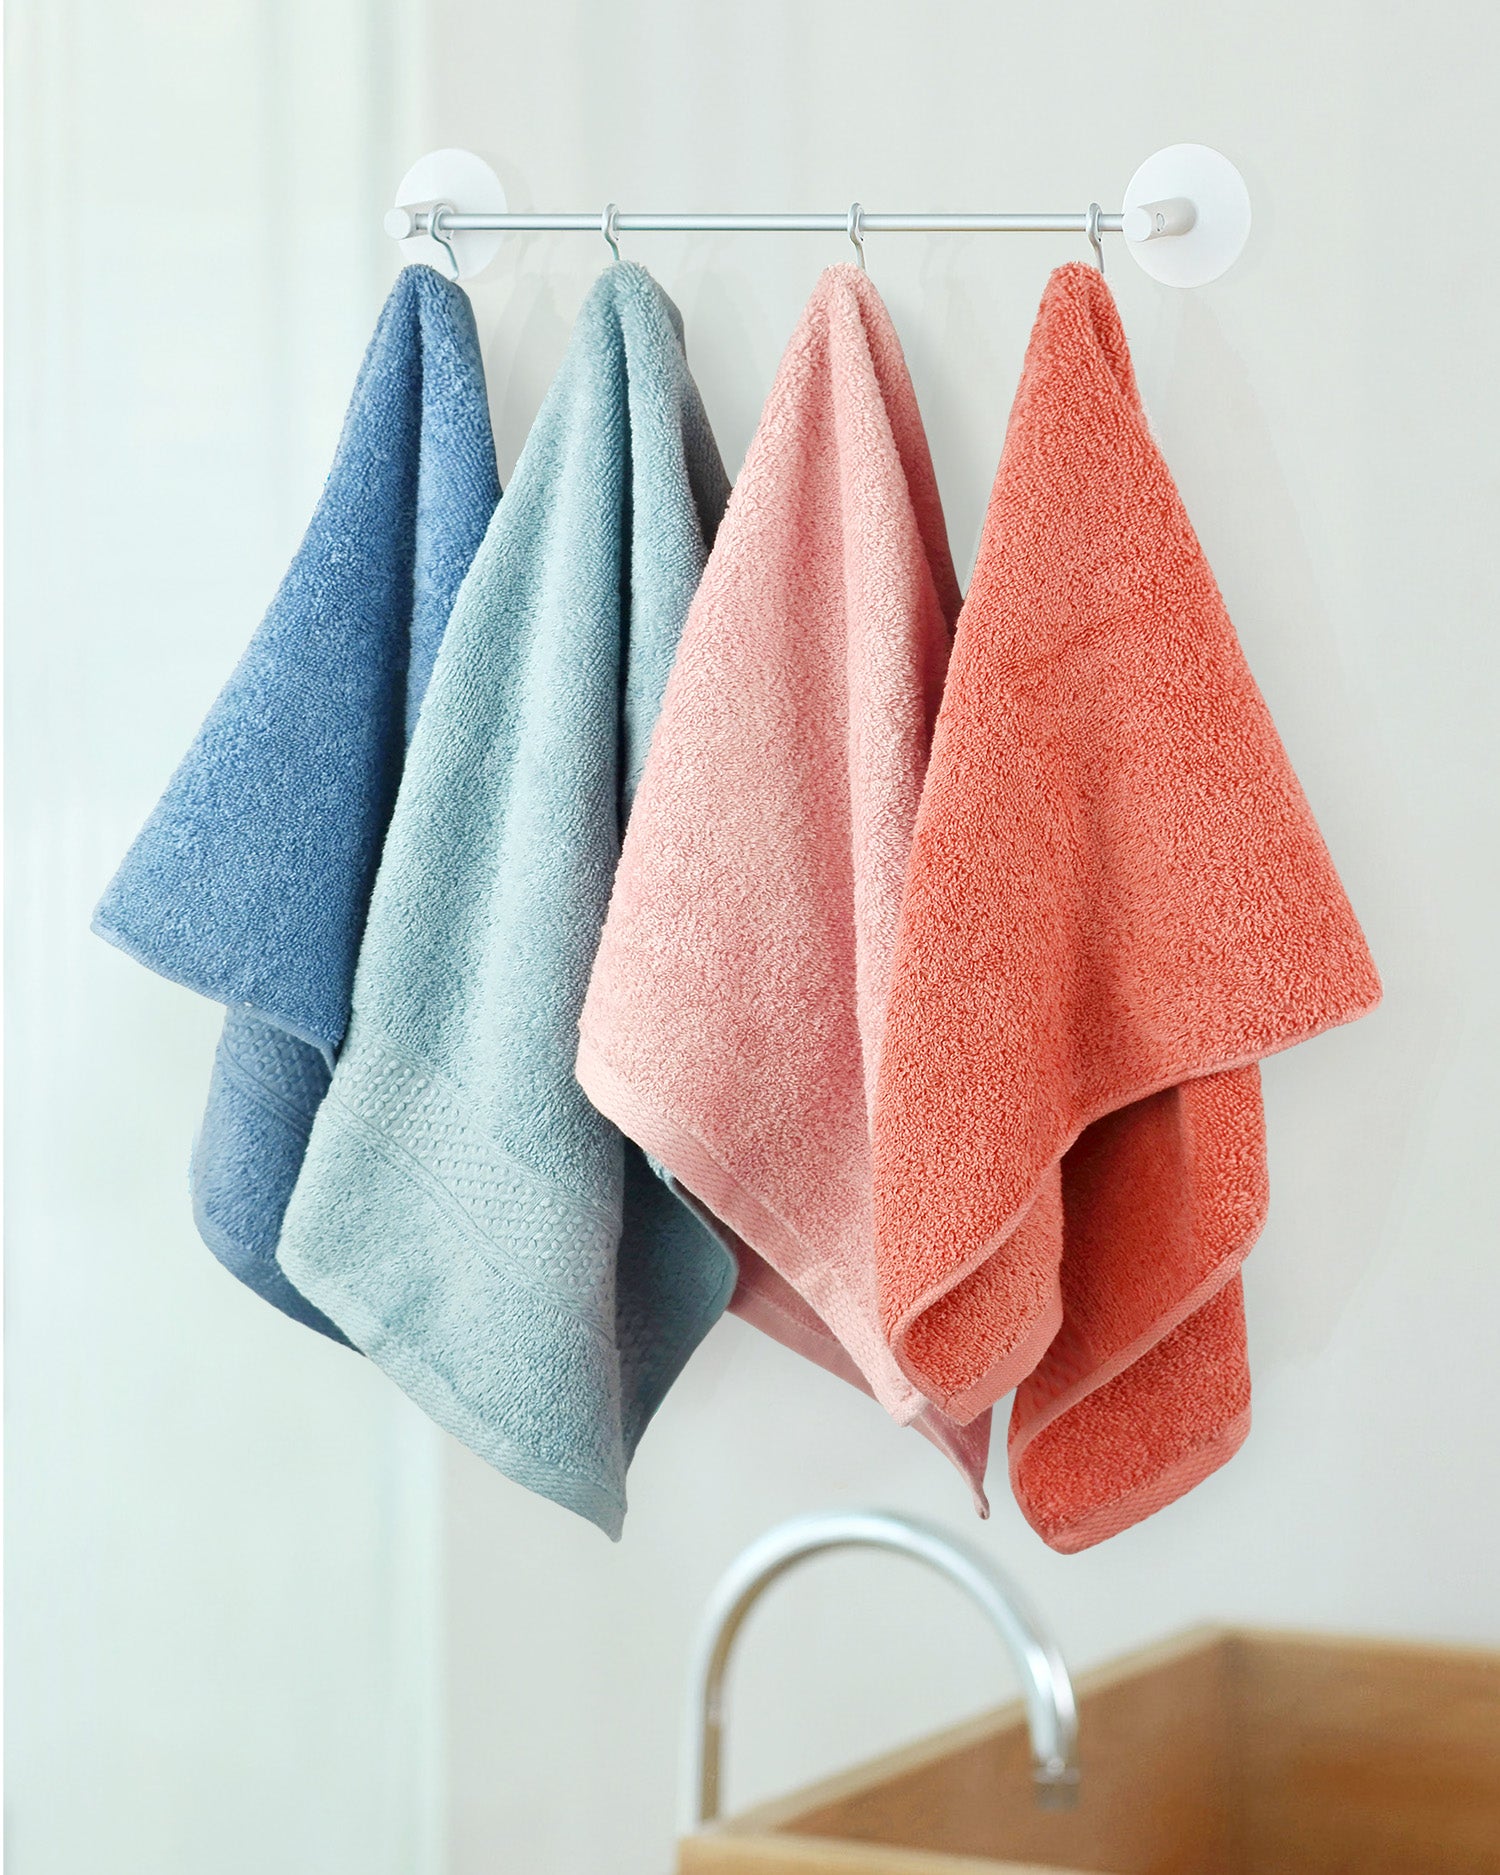 Pack of 12 Cotton Super Absorbent Towels – Home Goods+